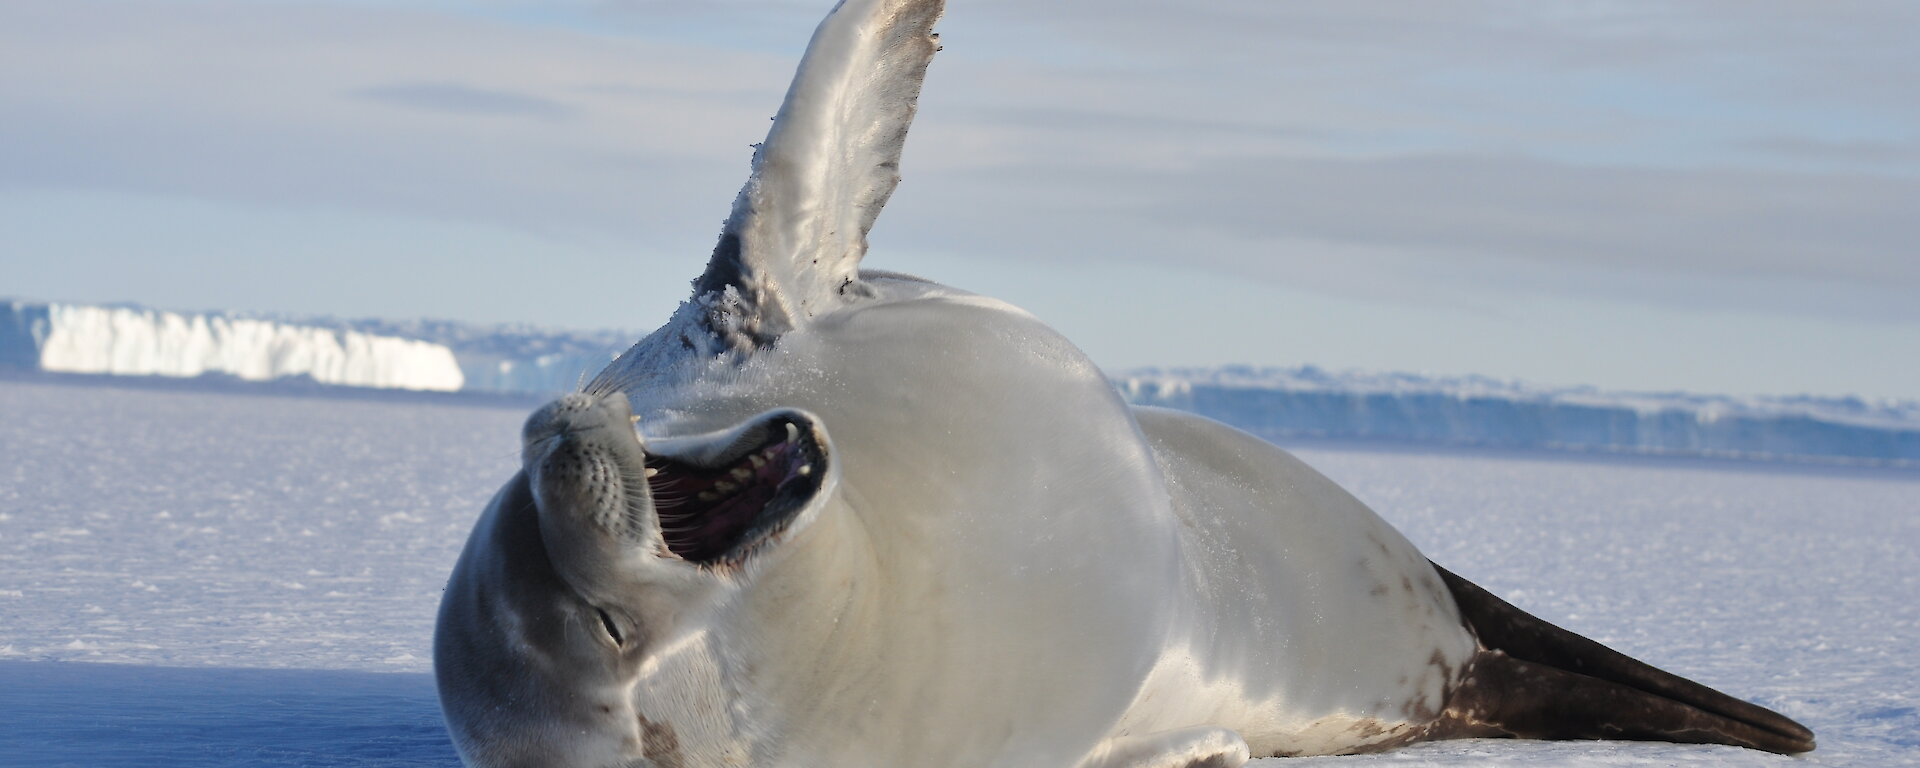 Crabeater seal lying on ice with mouth wide